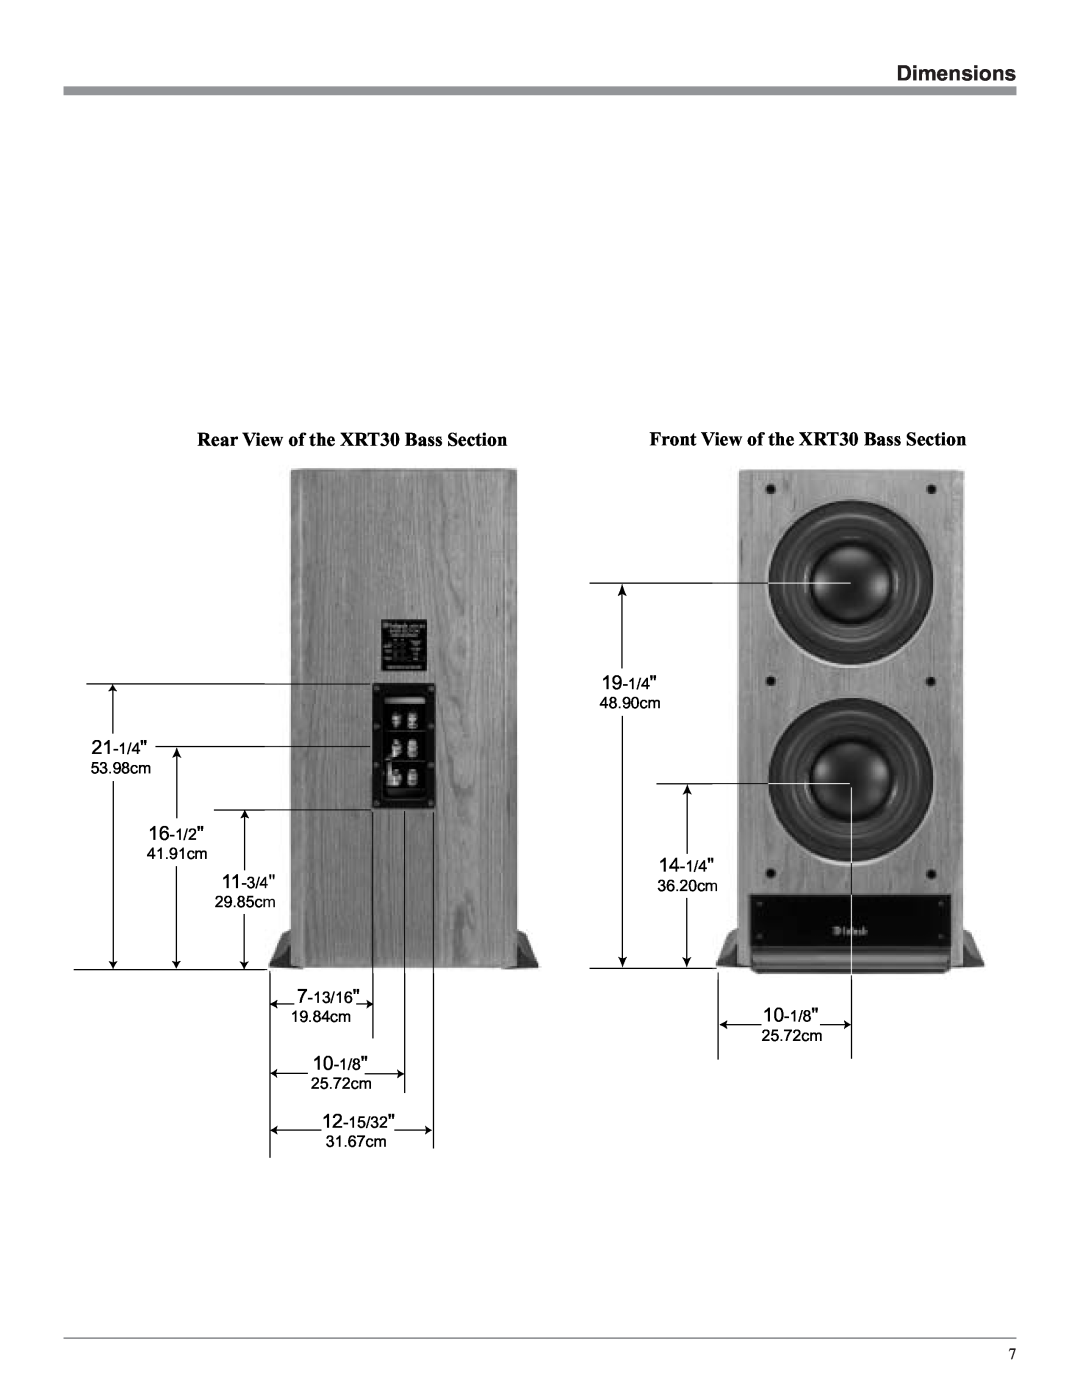 McIntosh owner manual Dimensions, Rear View of the XRT30 Bass Section, Front View of the XRT30 Bass Section 